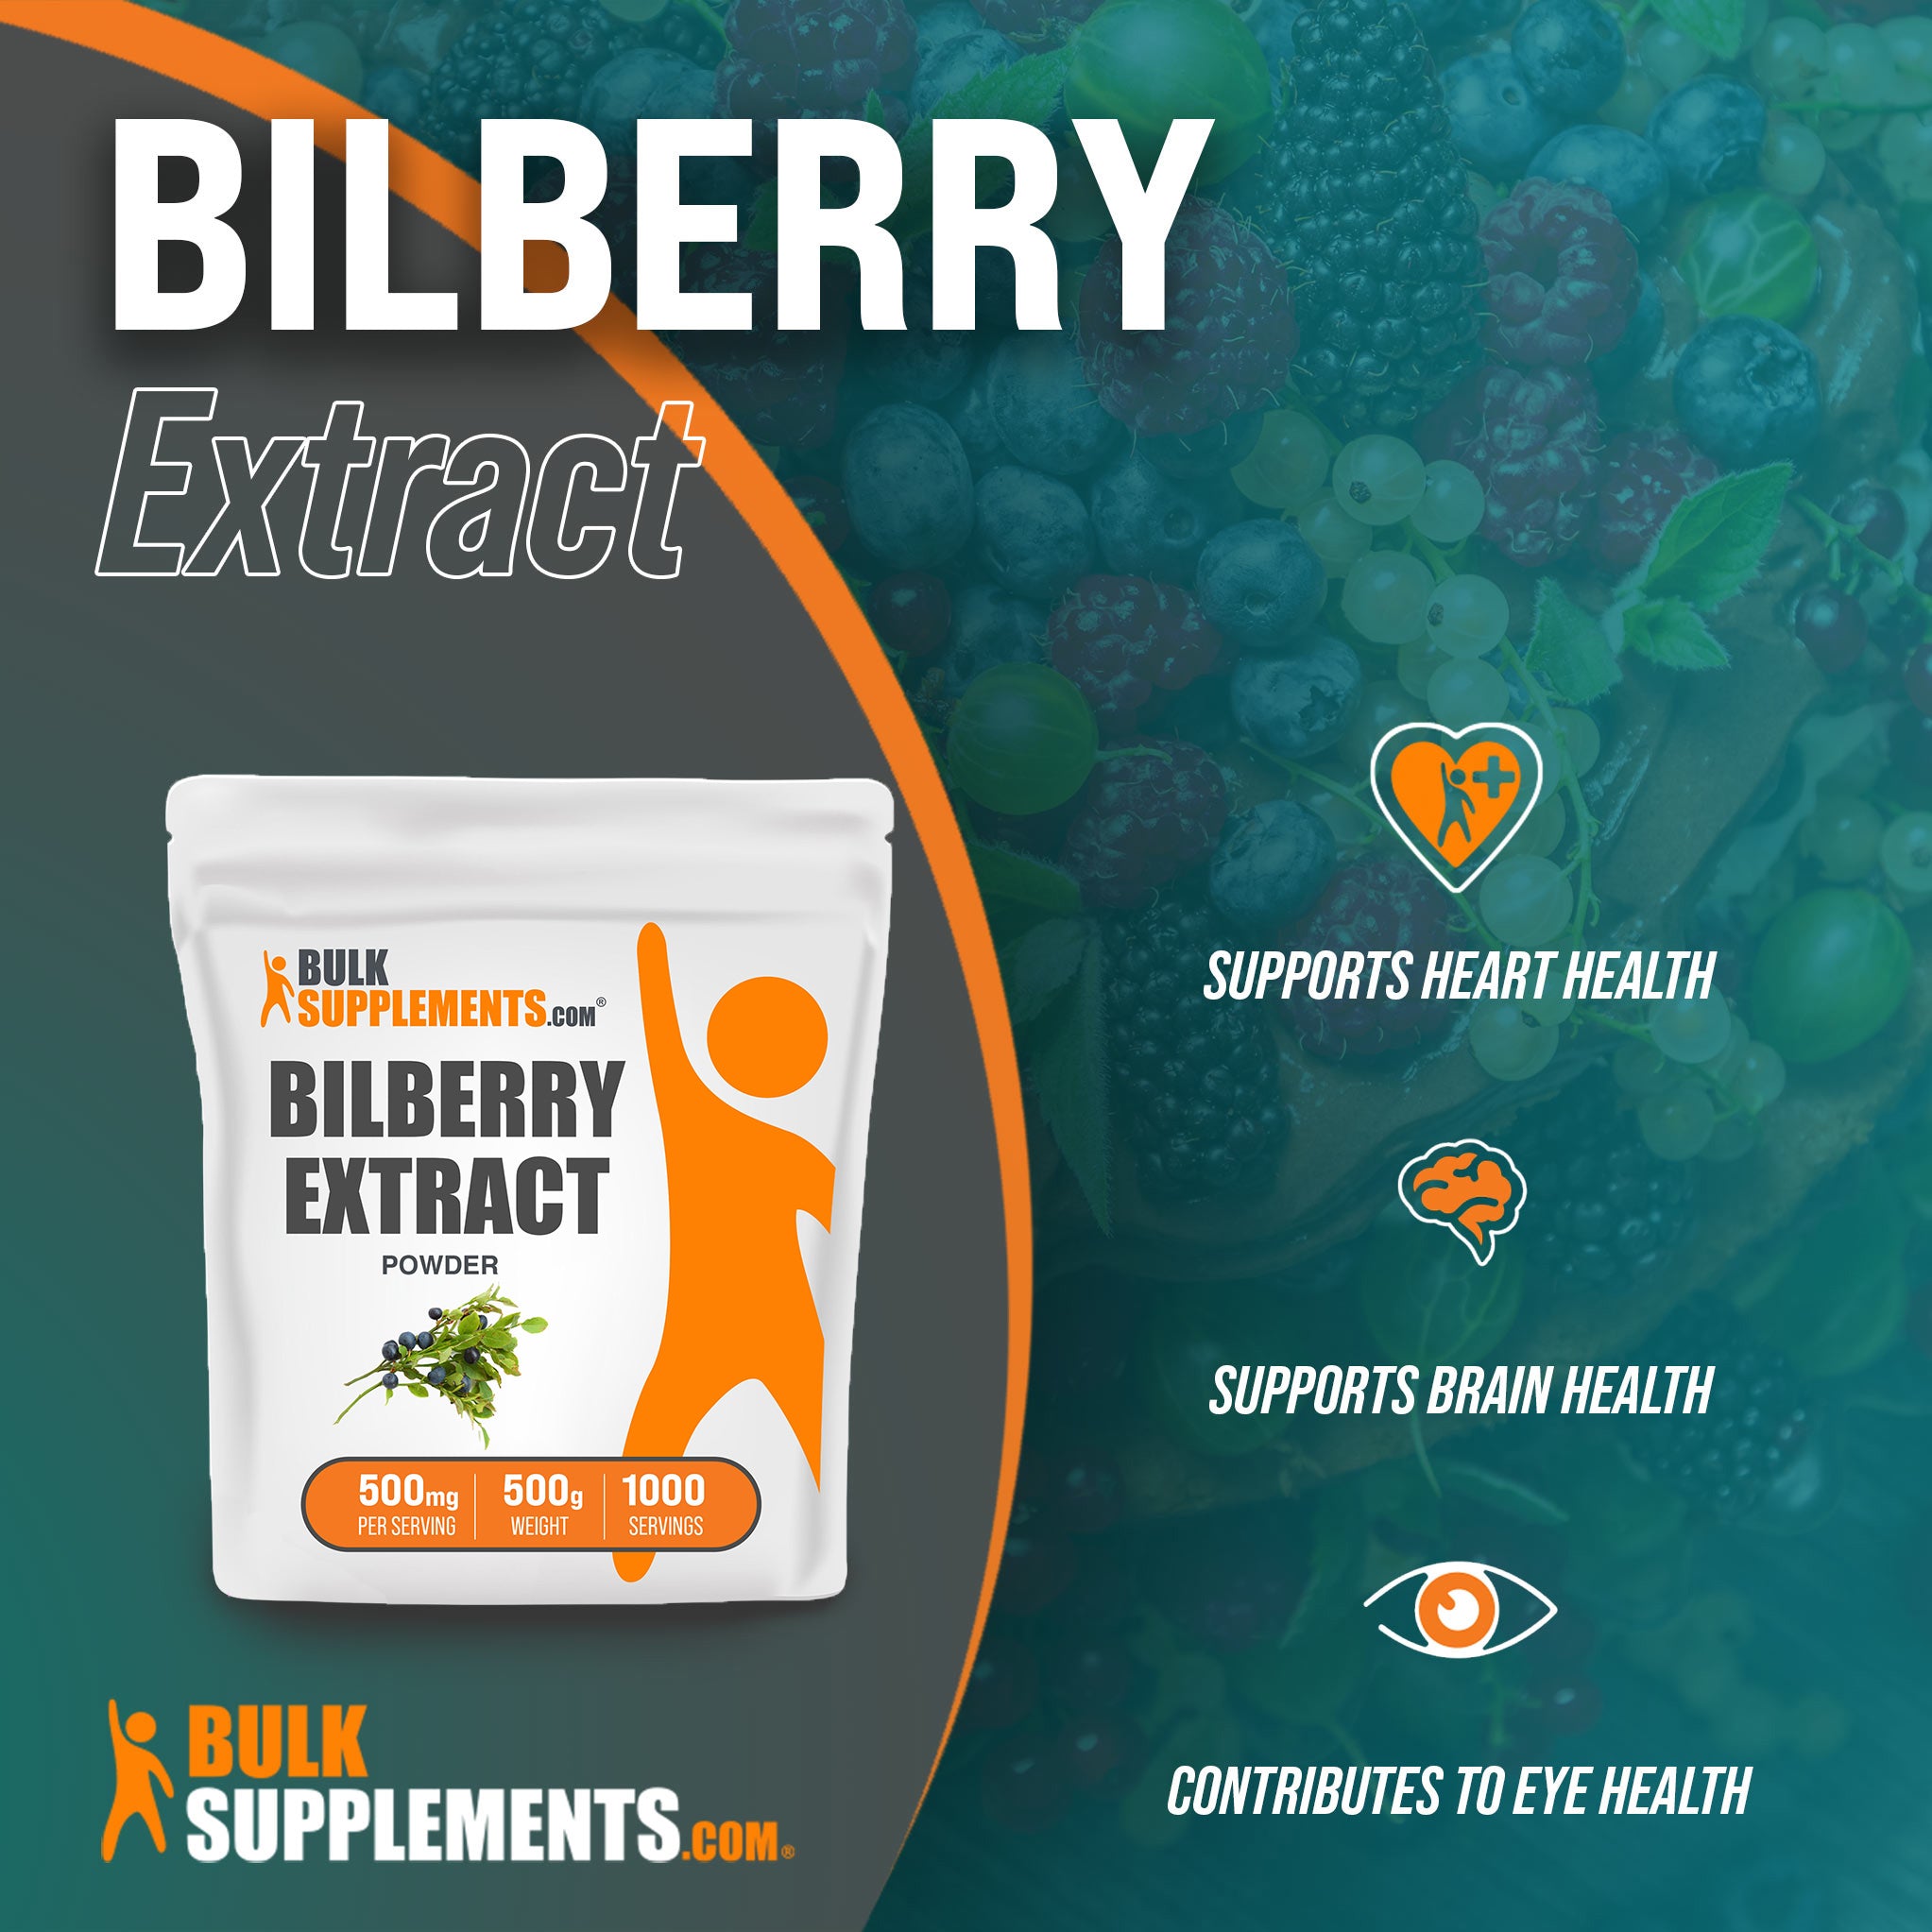 500g Bilberry Extract is an ideal eye supplement